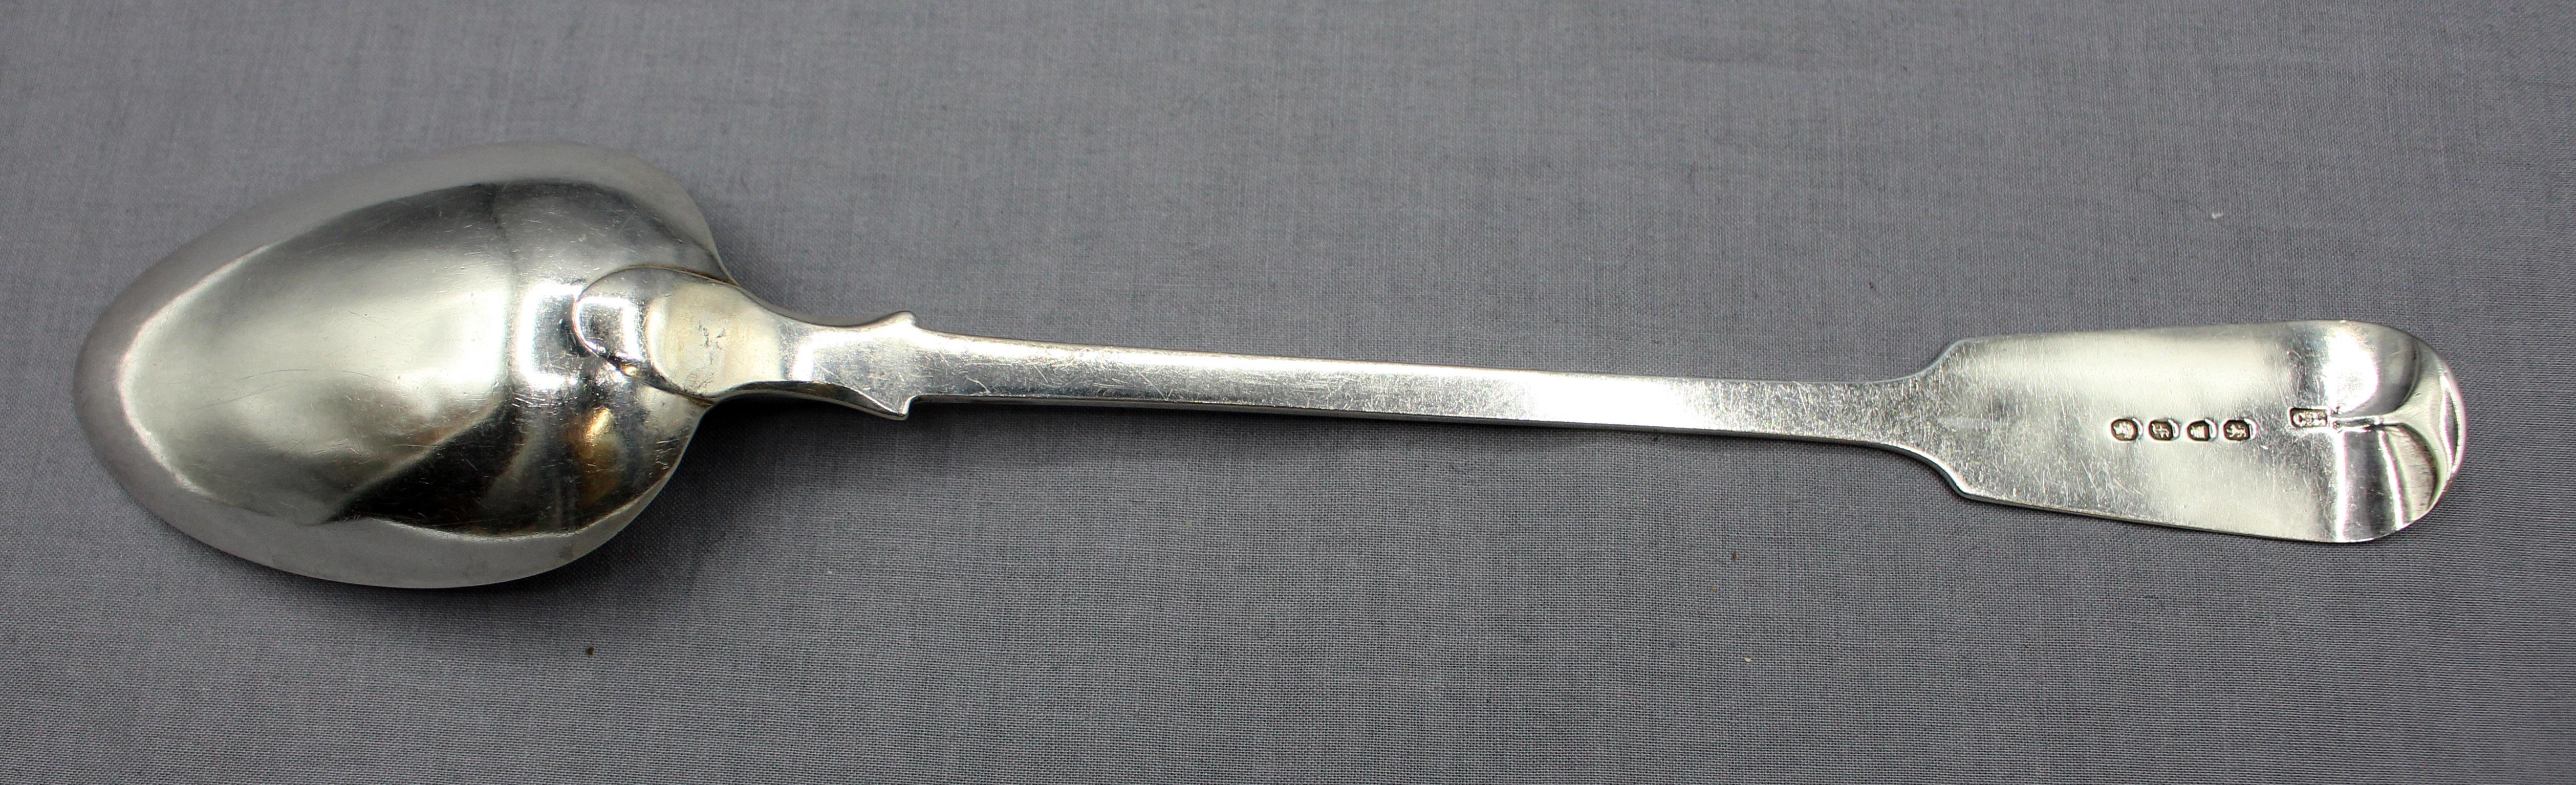 London, 1841, fiddleback sterling silver basting spoon. Apprentice marks of Charles Lias. Shop at 65 Crown St., Finsbury Square. With chamfered edges & shoulder, it is a fine example of the George III period. Monogram 